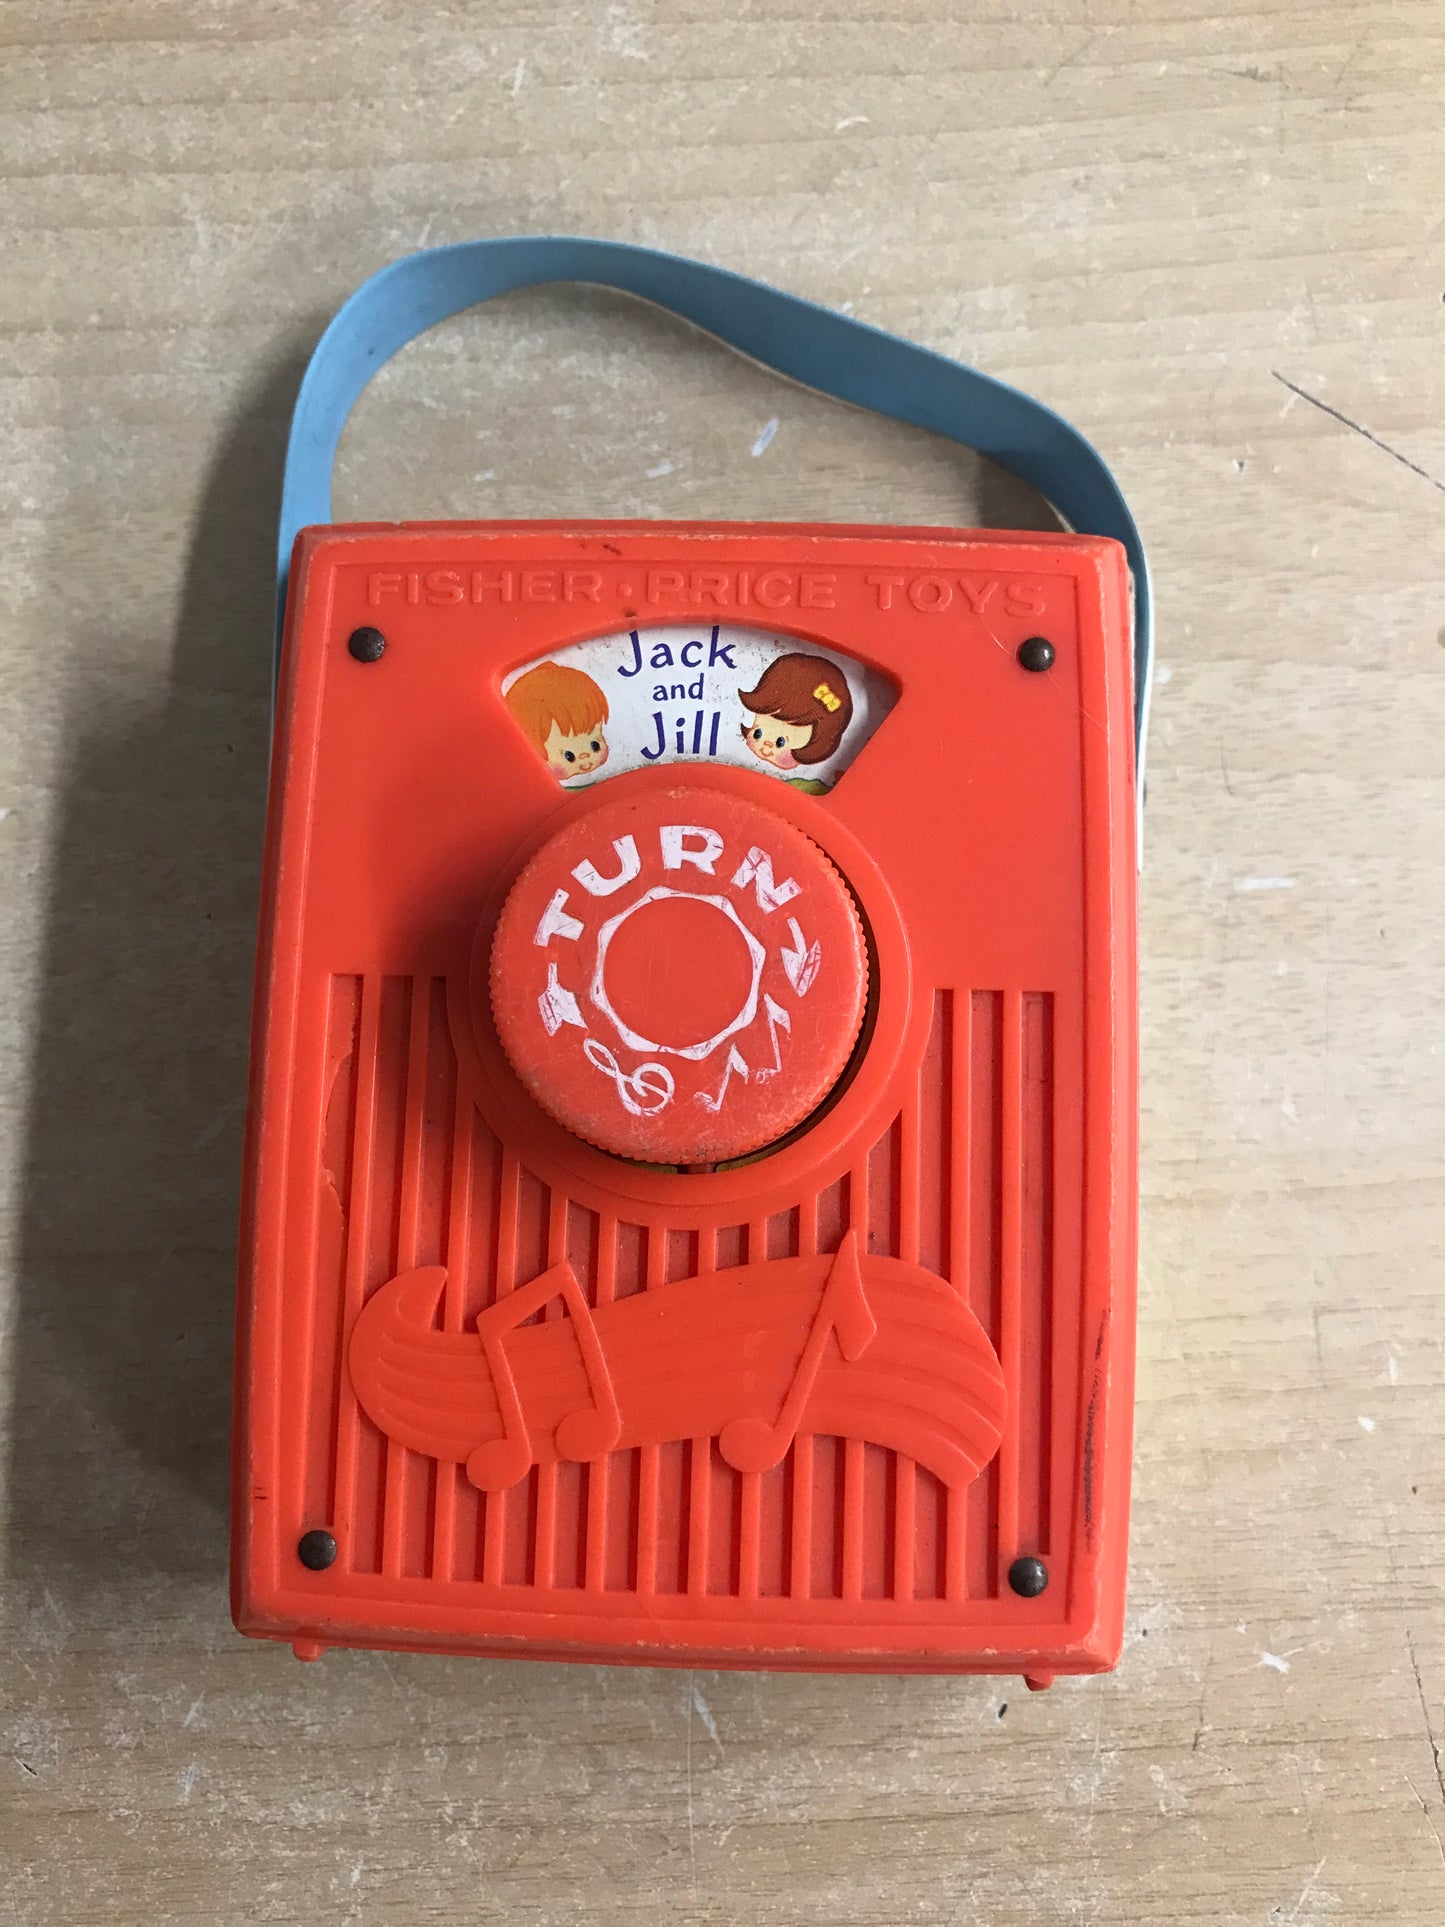 Fisher Price Vintage 1977 Music Box Pocket Radio Jack and Jill Wear Litho Paper Wear Works Great Wood Plastic